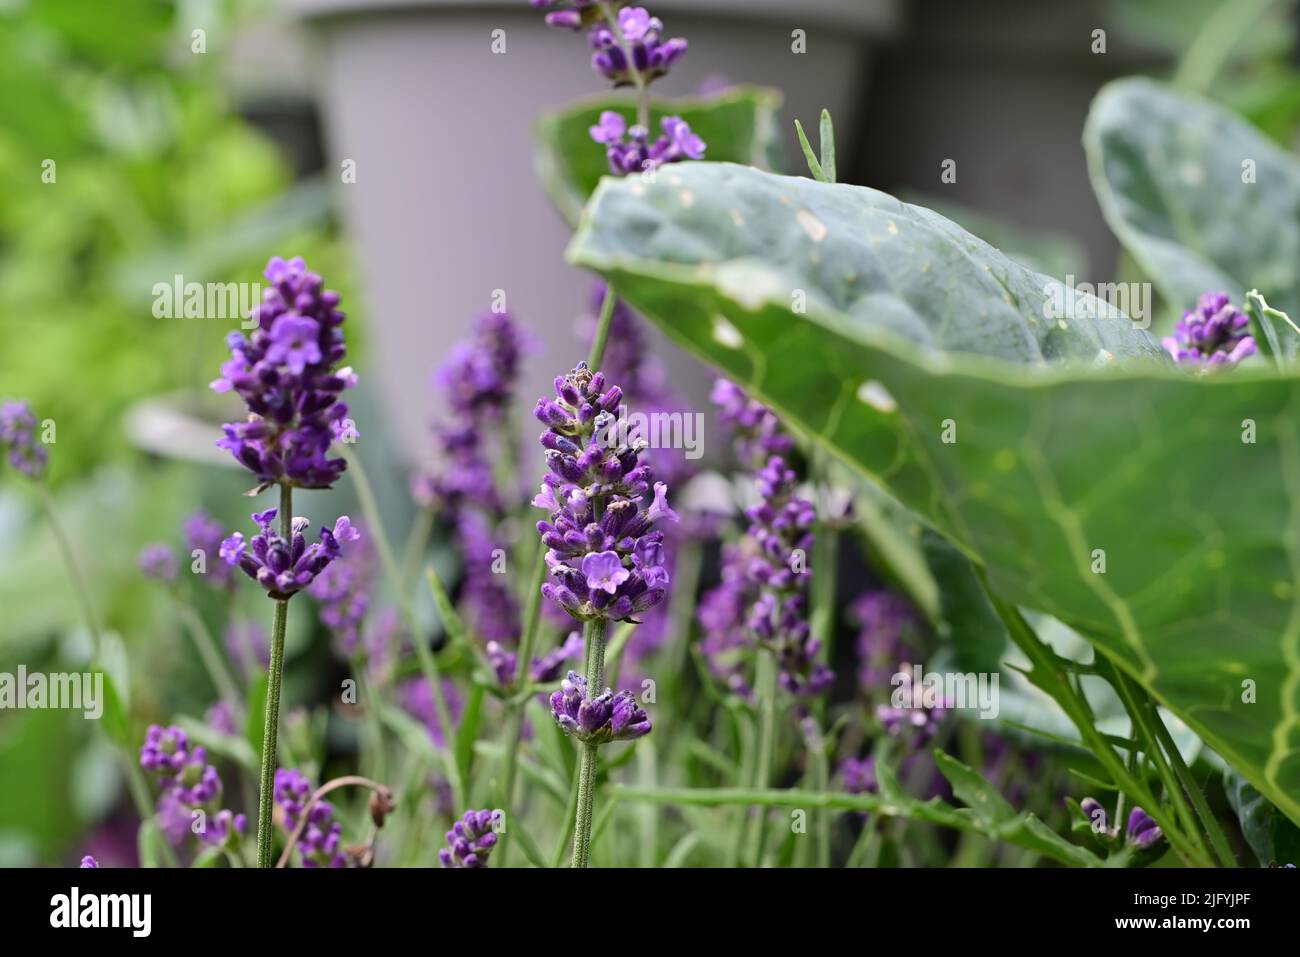 Flowering lavender next to a cabbage plant as a close up Stock Photo